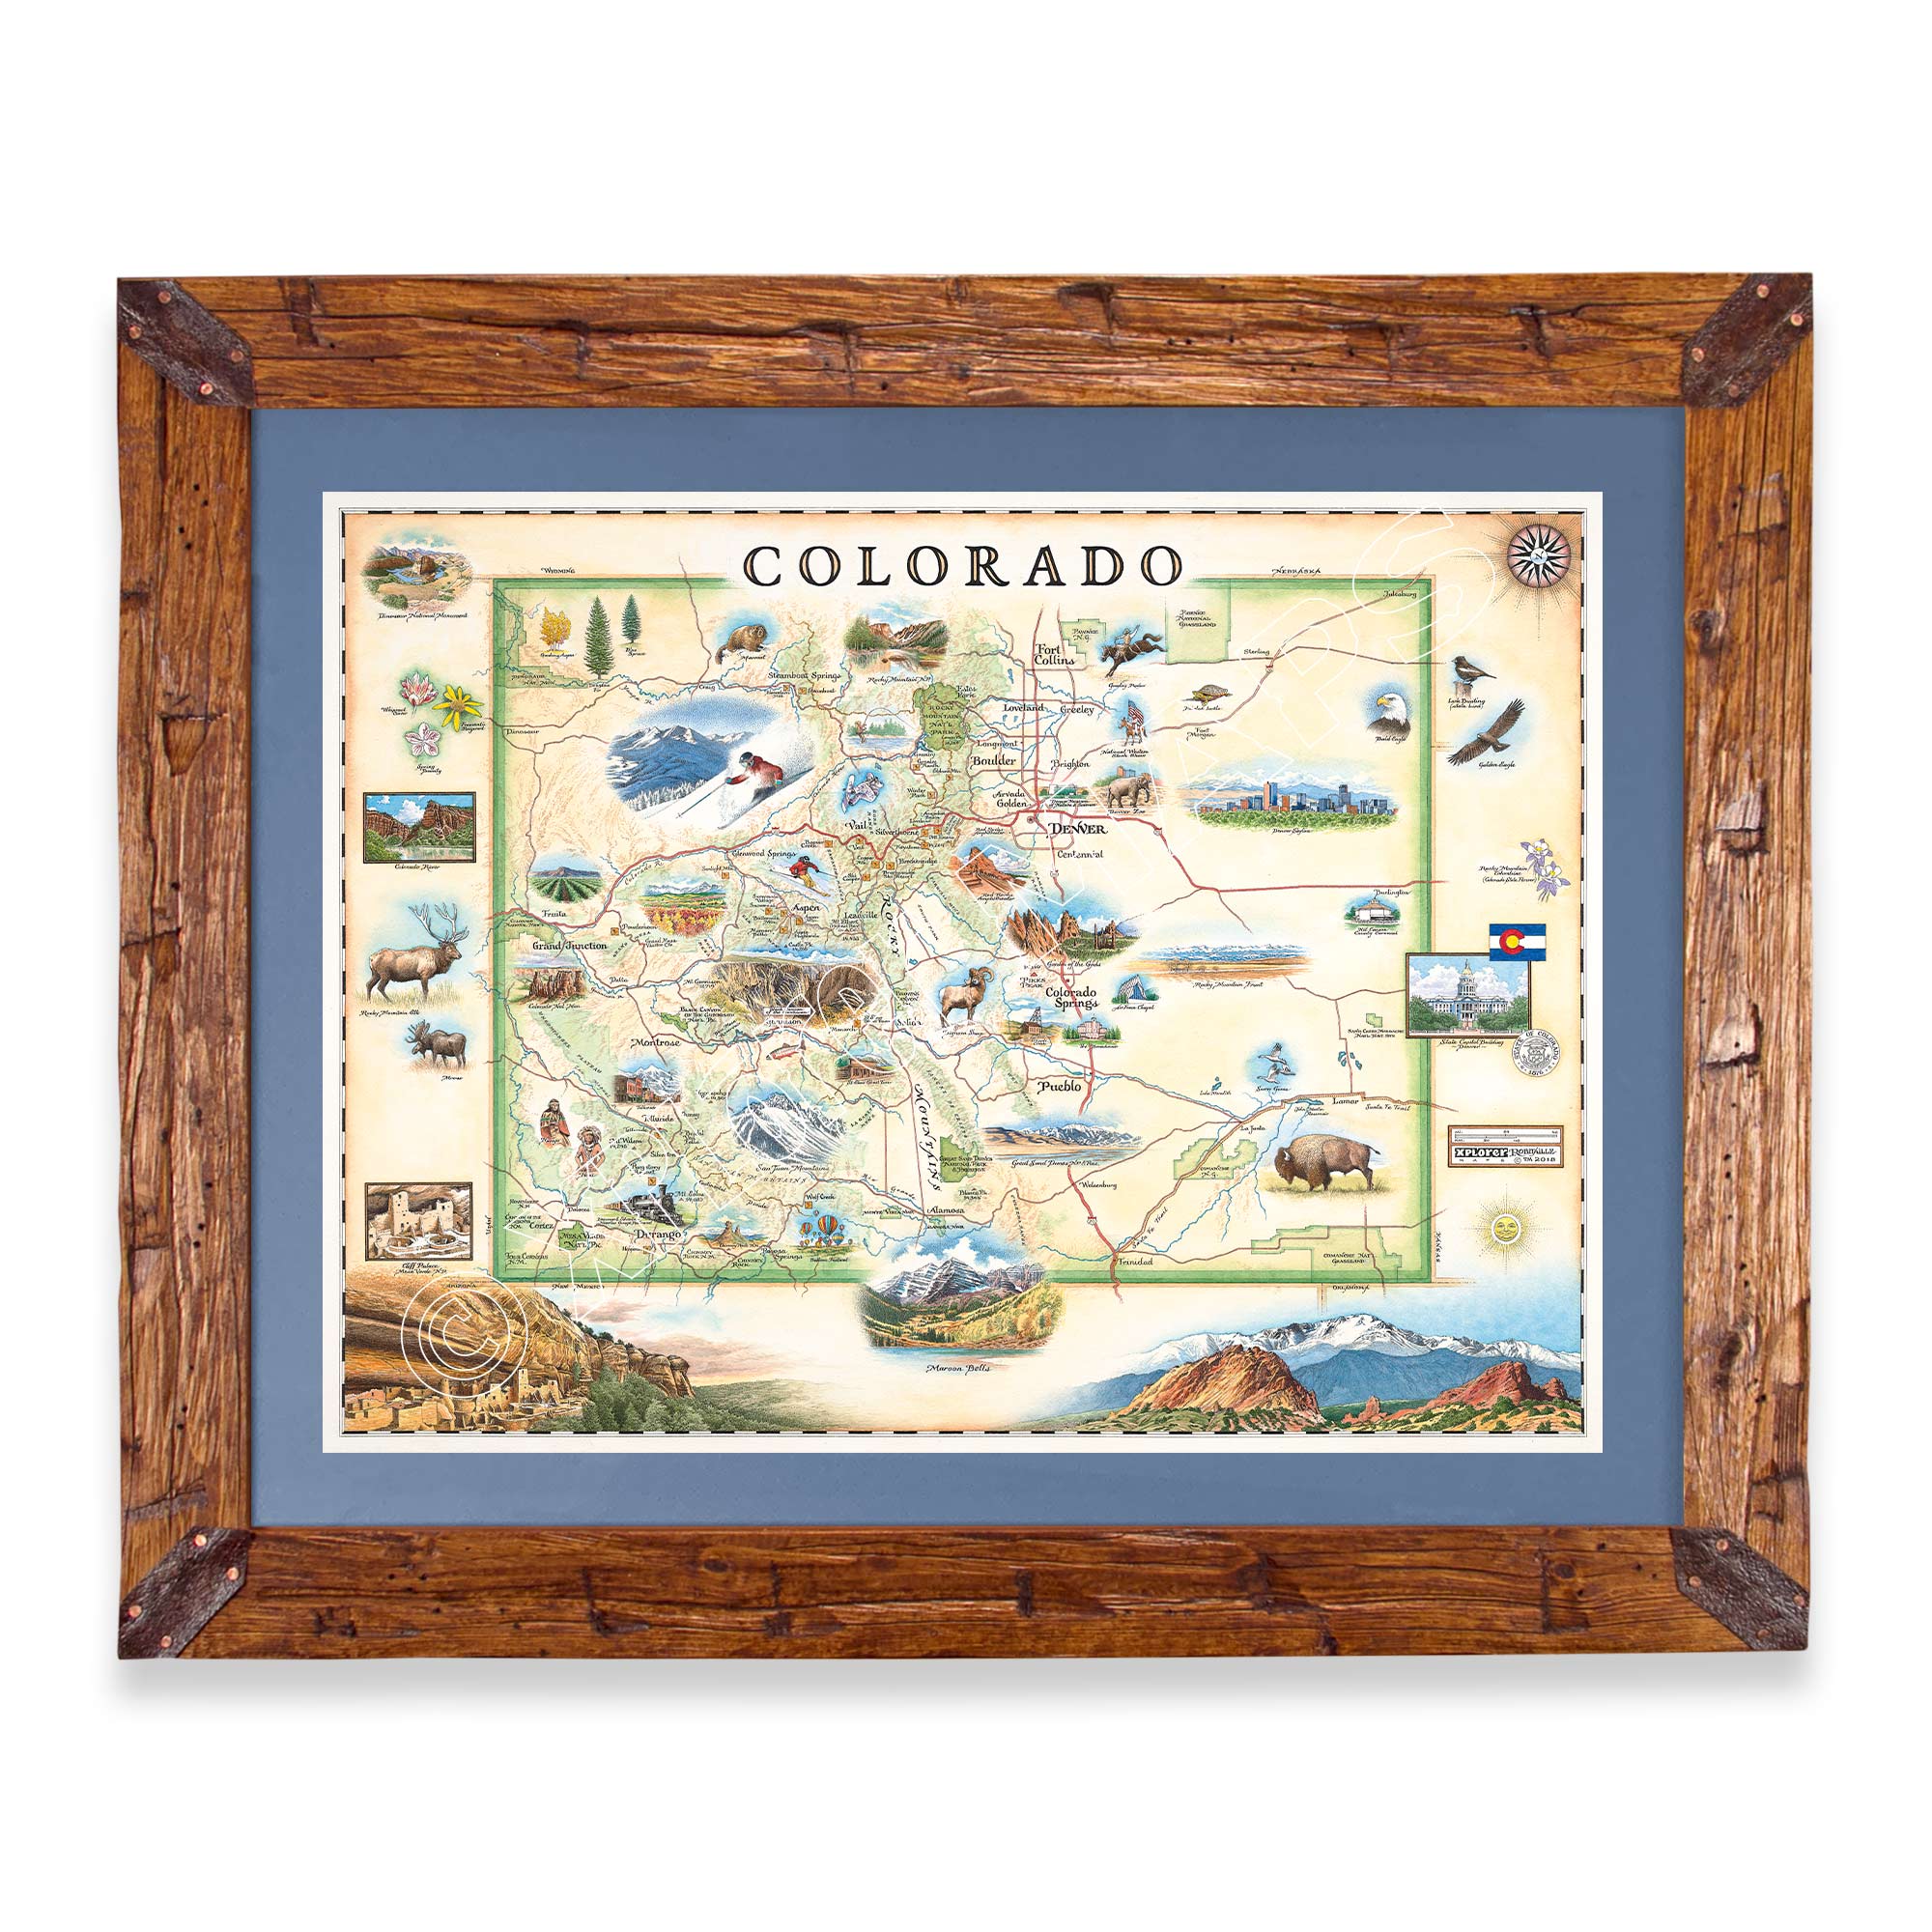 Colorado State hand-drawn map in a Montana hand-scraped pine wood frame with blue mat.